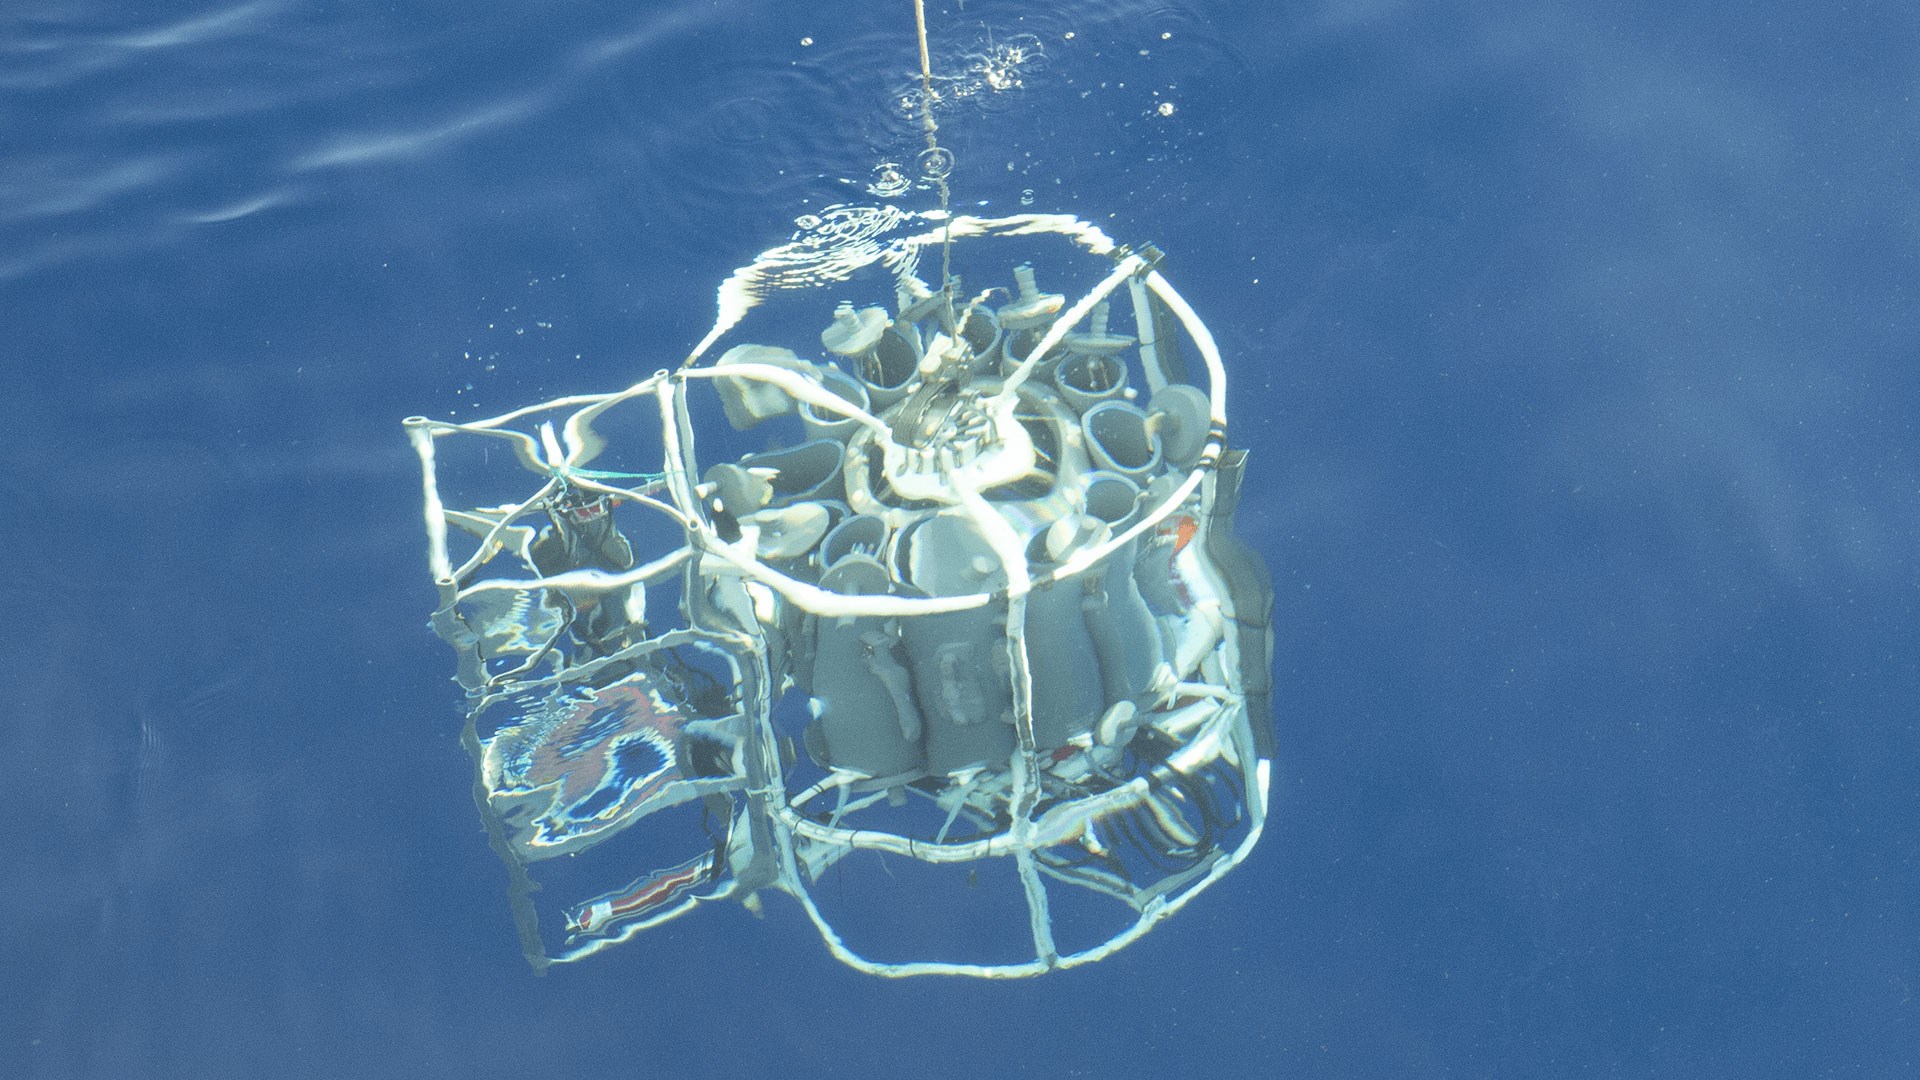 CTD is deployed into the sea